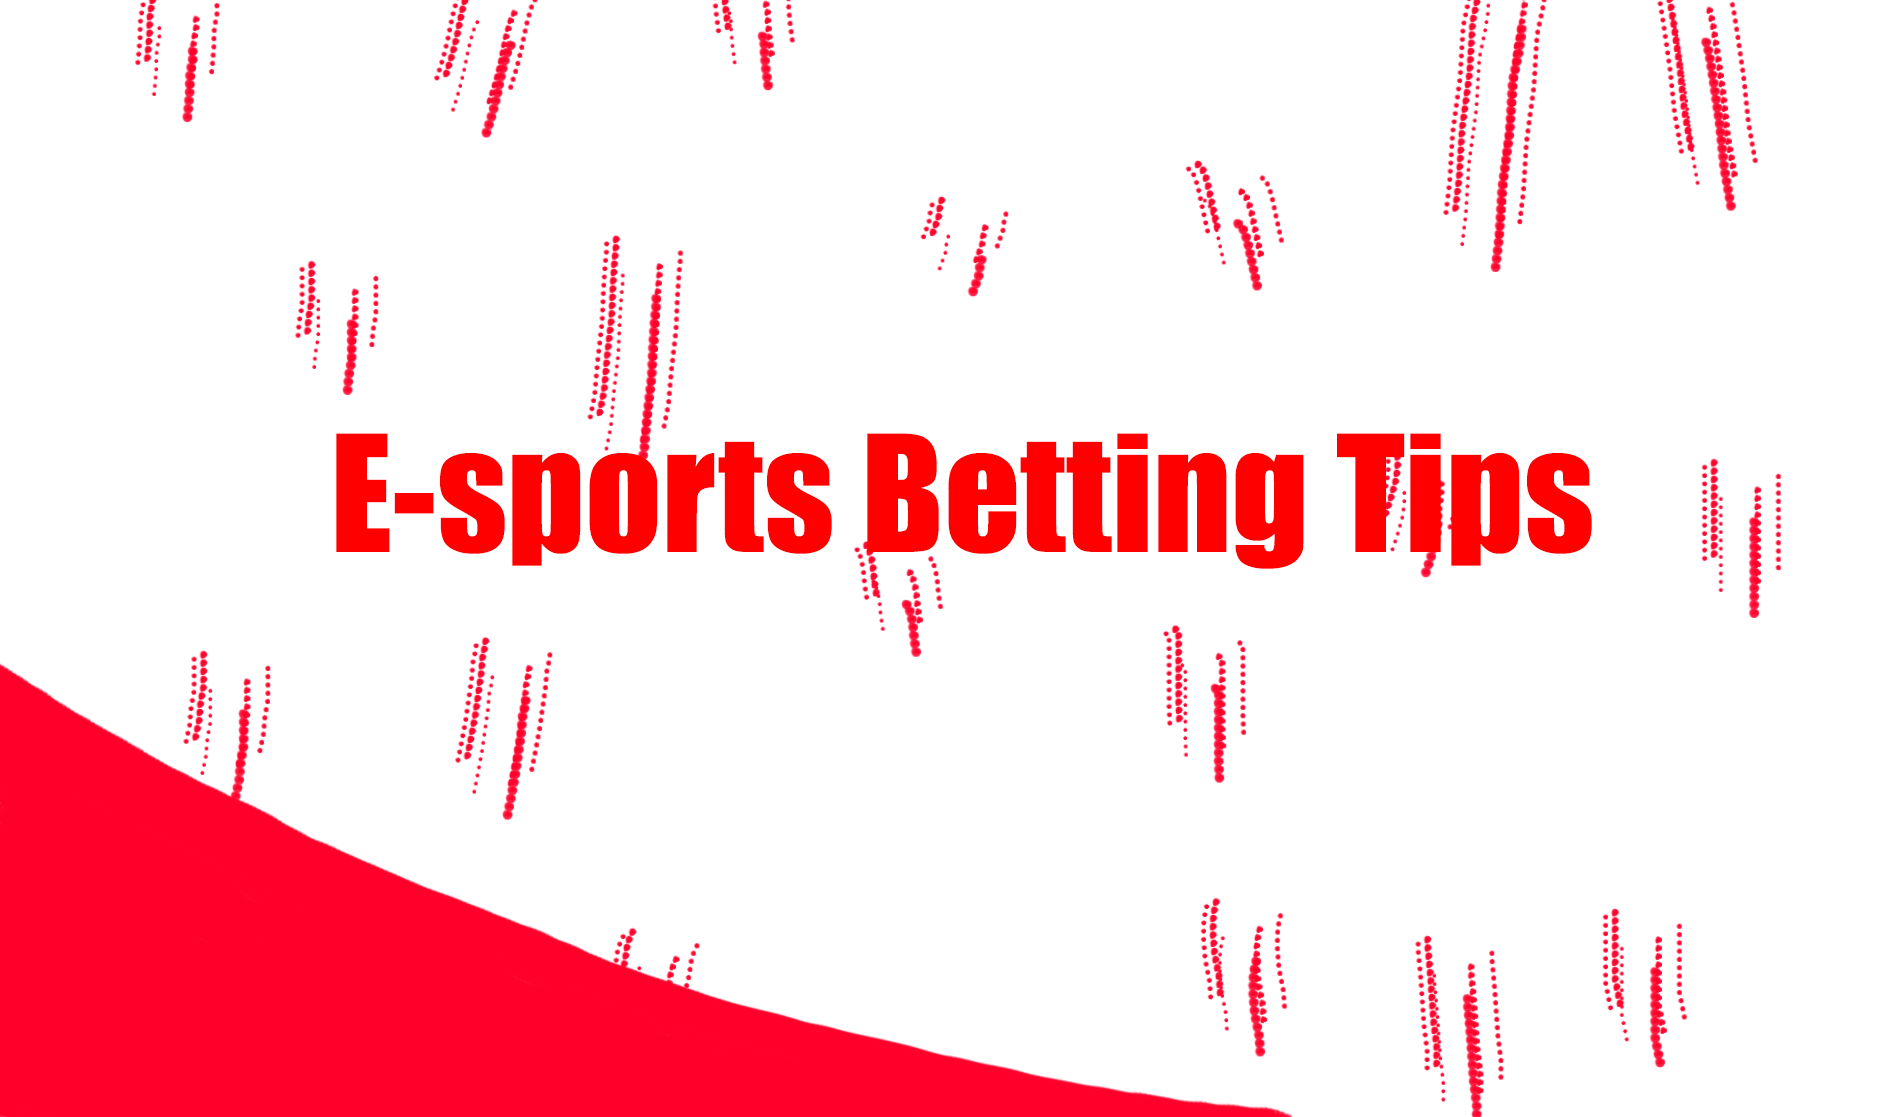 Top 4 Esports Betting Tips